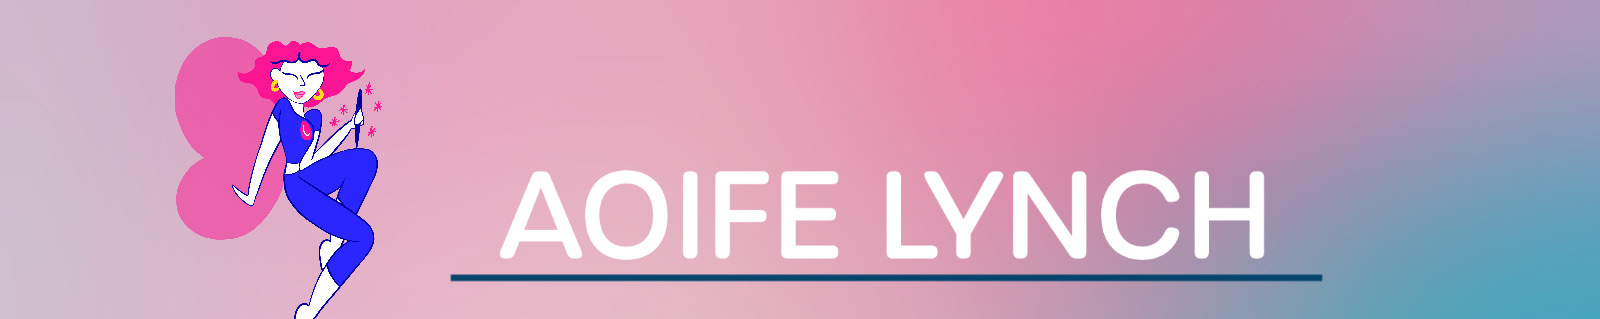 Aoife Lynch's profile banner